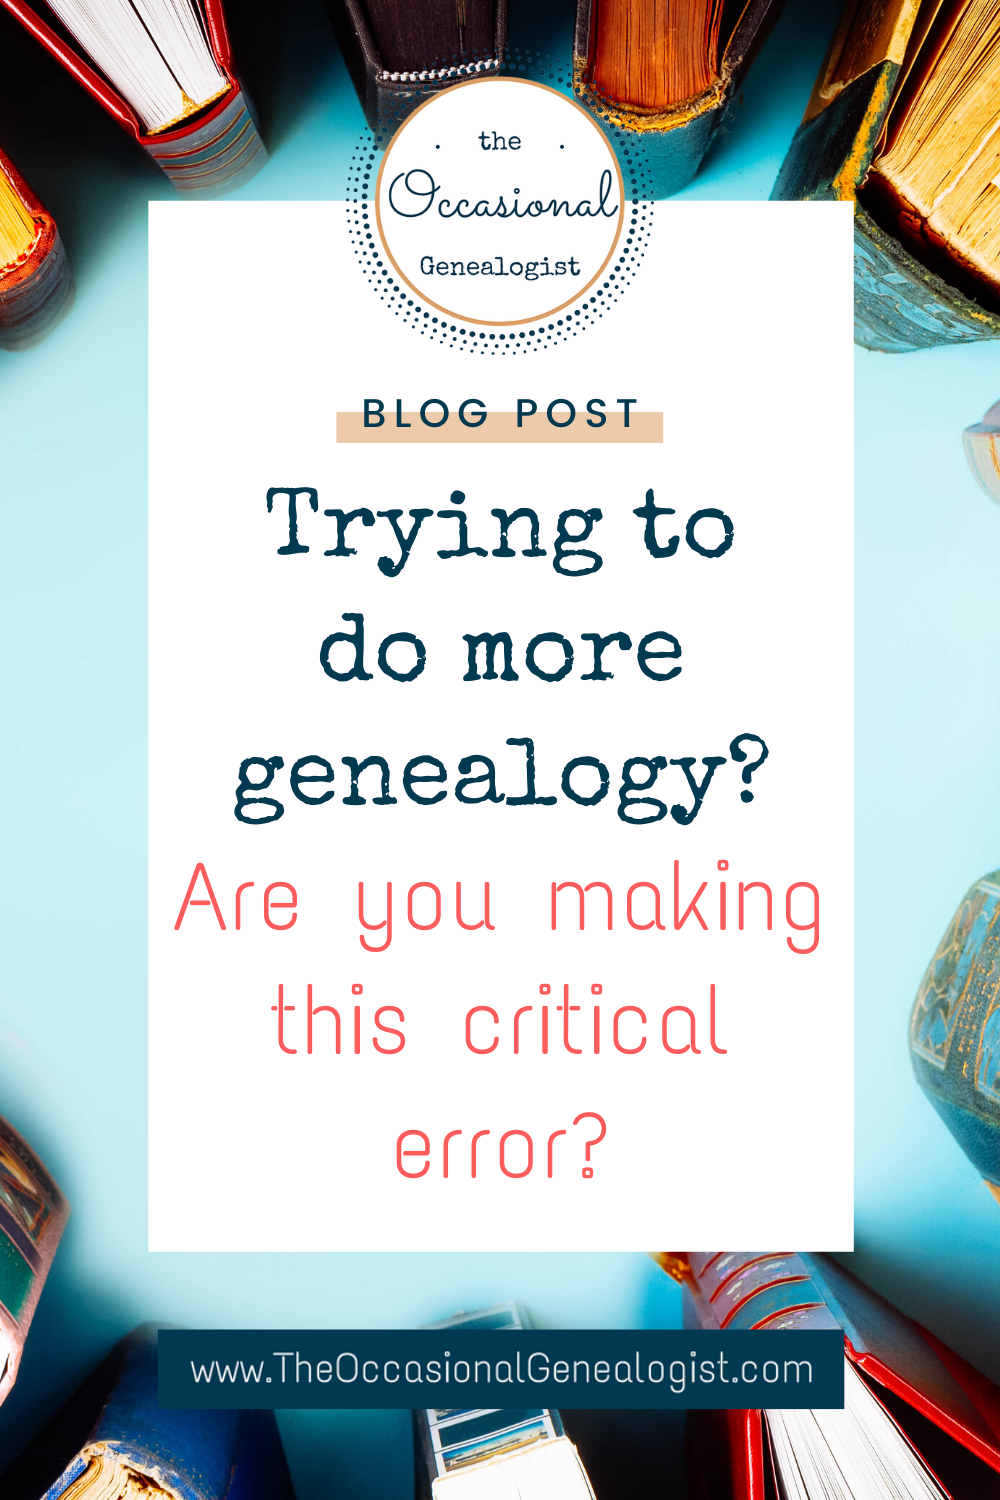 The Occasional Genealogist